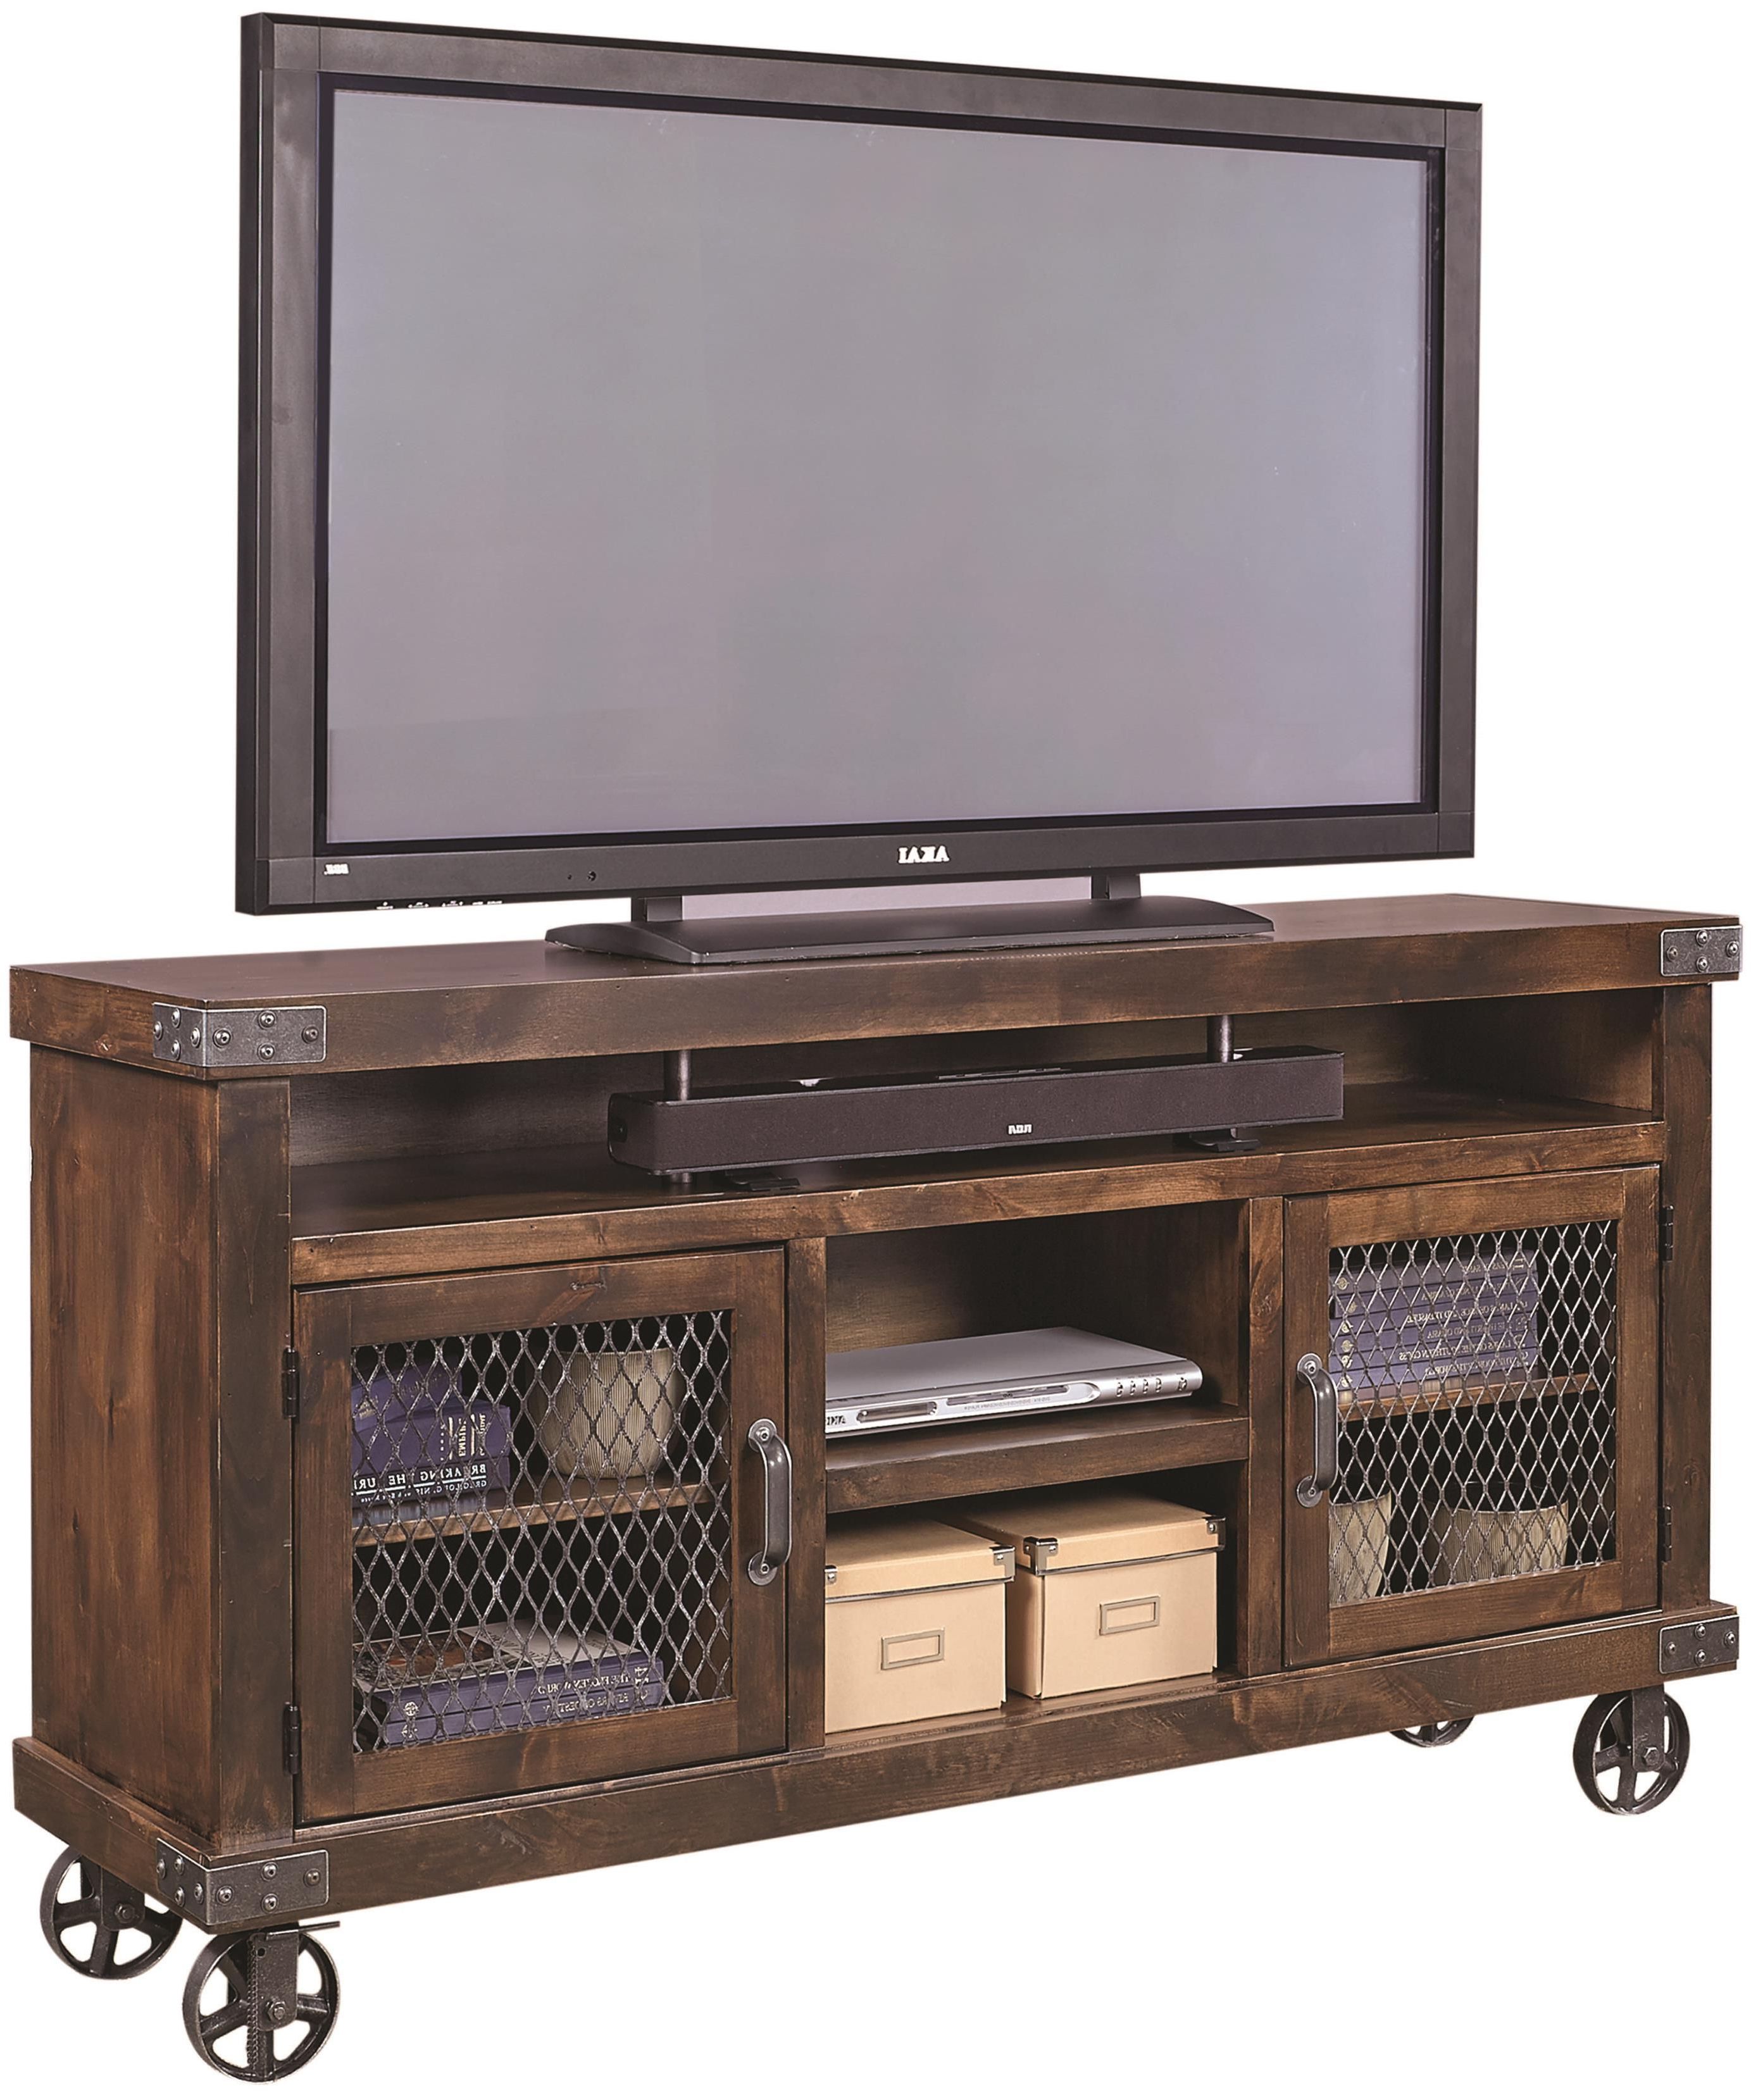 Rustic Wood Tv Cabinets Within Most Up To Date Industrial 65" Console With Metal Castersaspenhome In  (View 7 of 20)